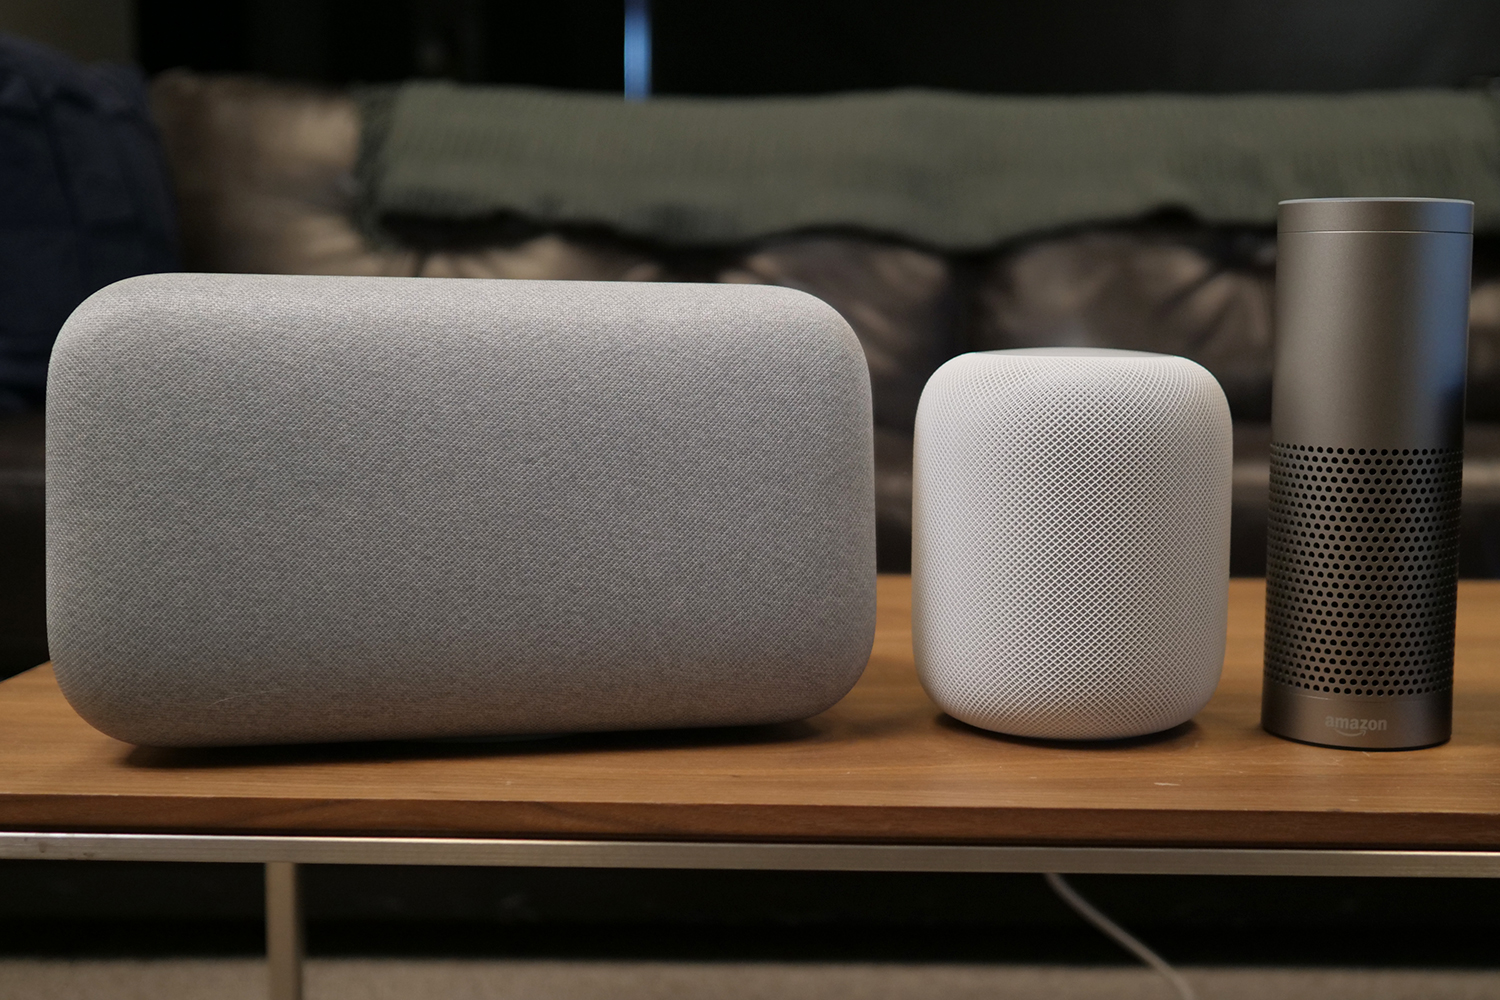 Echo vs Google Home: which smart speakers are best?